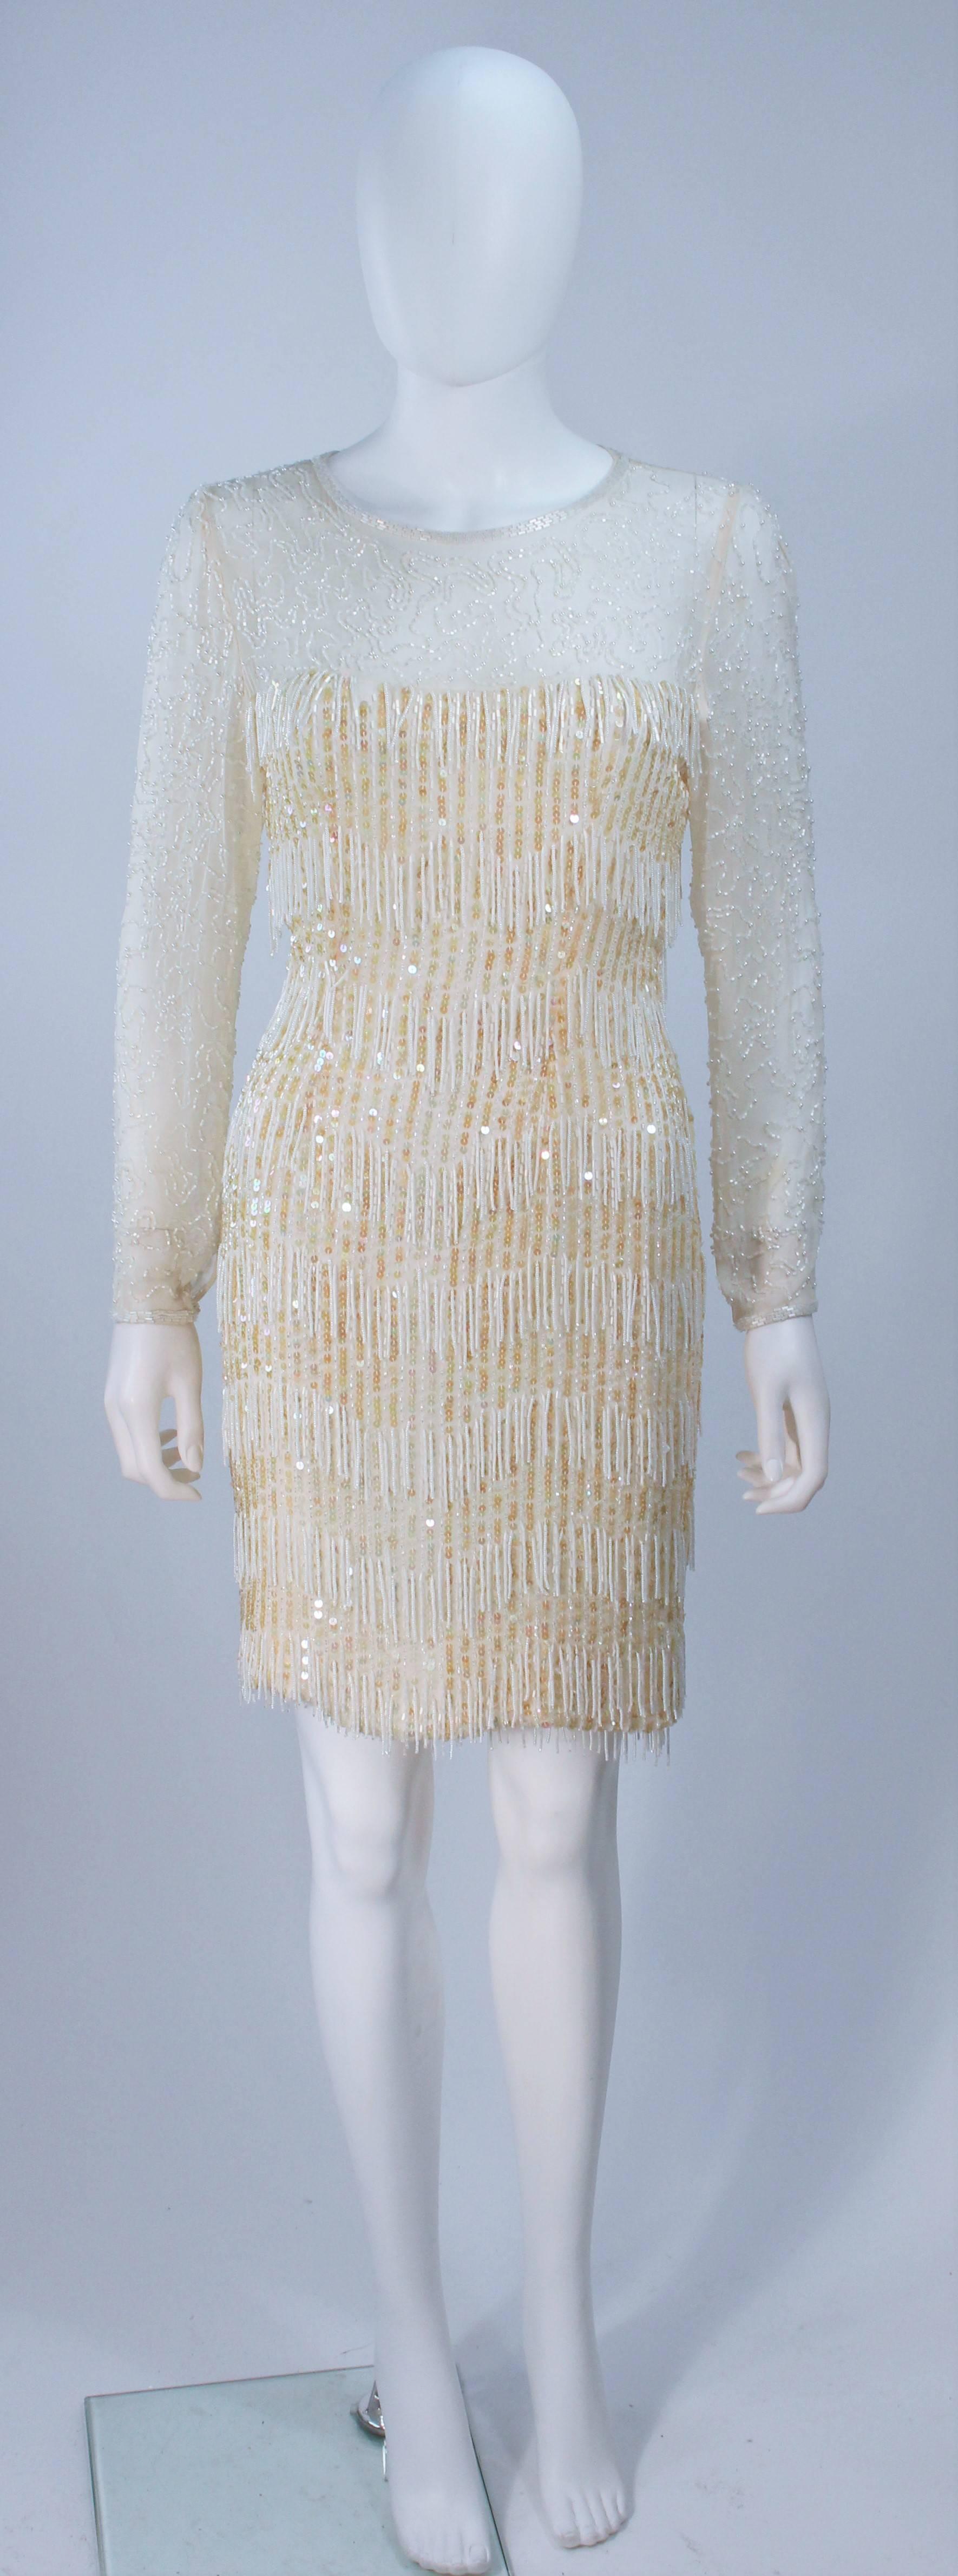  This cocktail dress is composed of a off white and cream combination with iridescent hued sequins and faux pearl bead applique. Features sheer sleeves and bodice.There is a center back zipper closure. In great vintage condition. 

  **Please